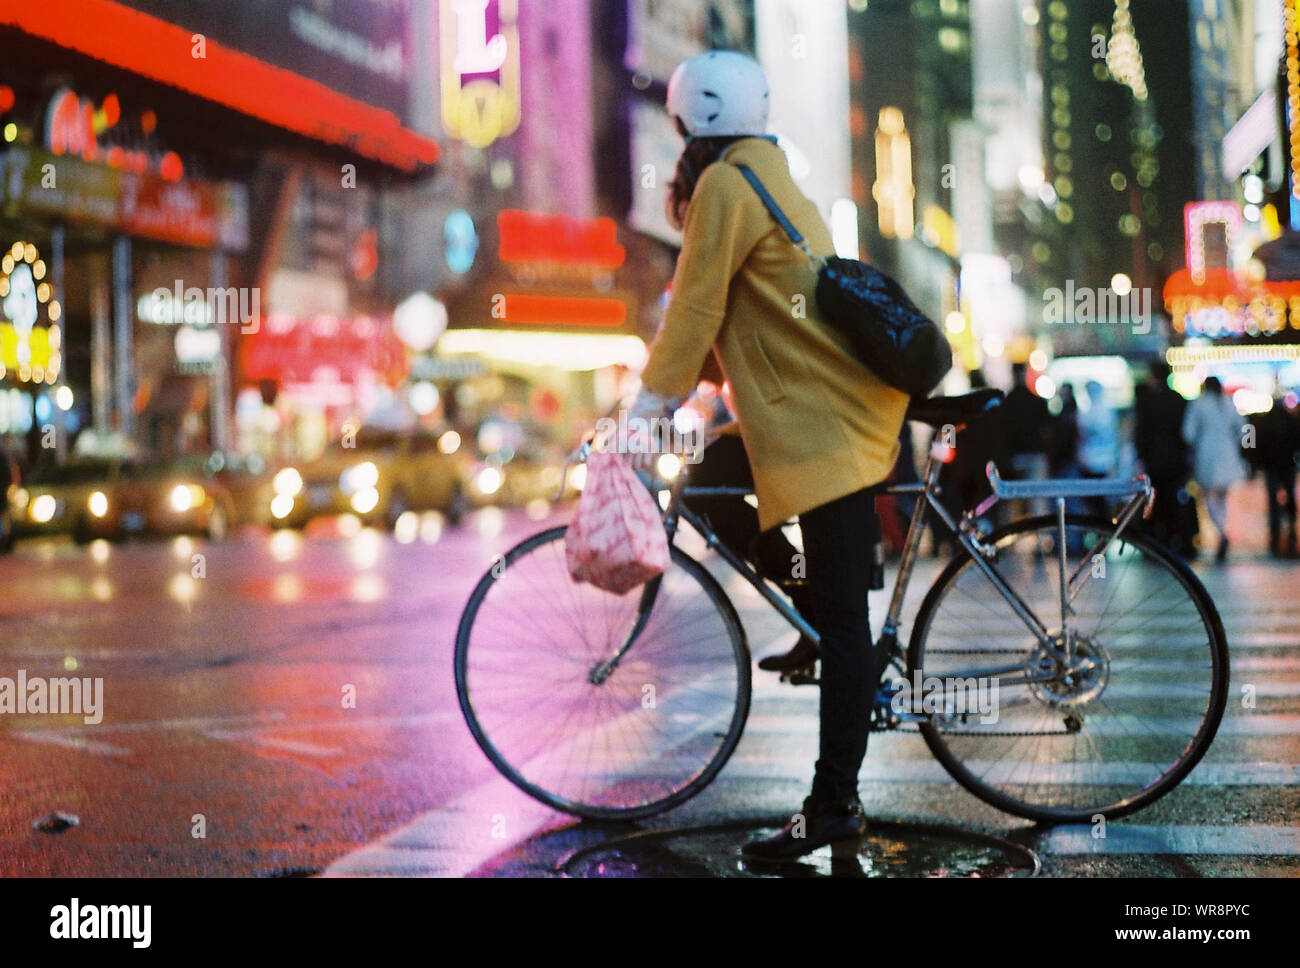 Cyclist Attempting To Cross Street Stock Photo